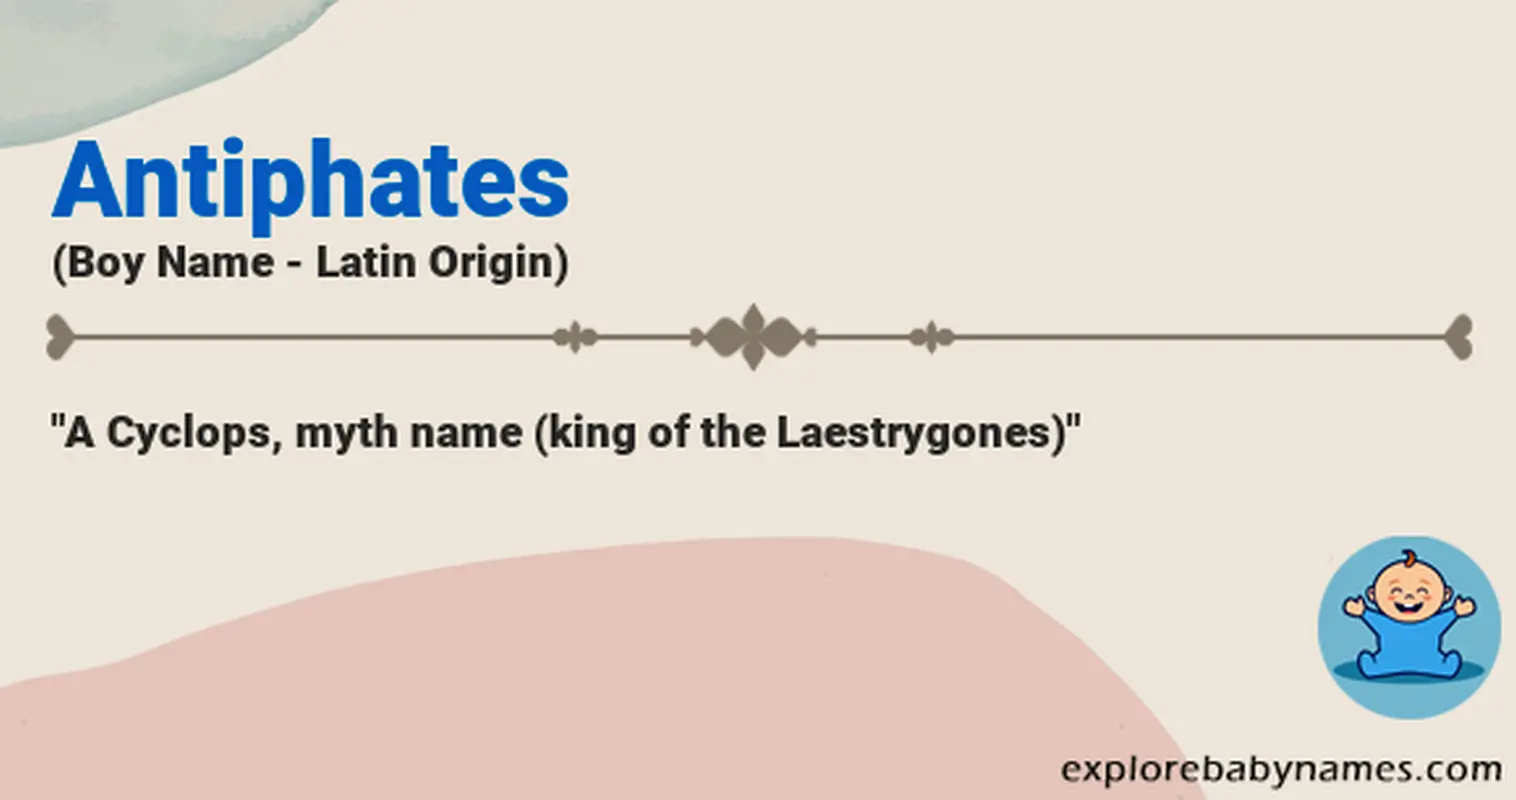 Meaning of Antiphates